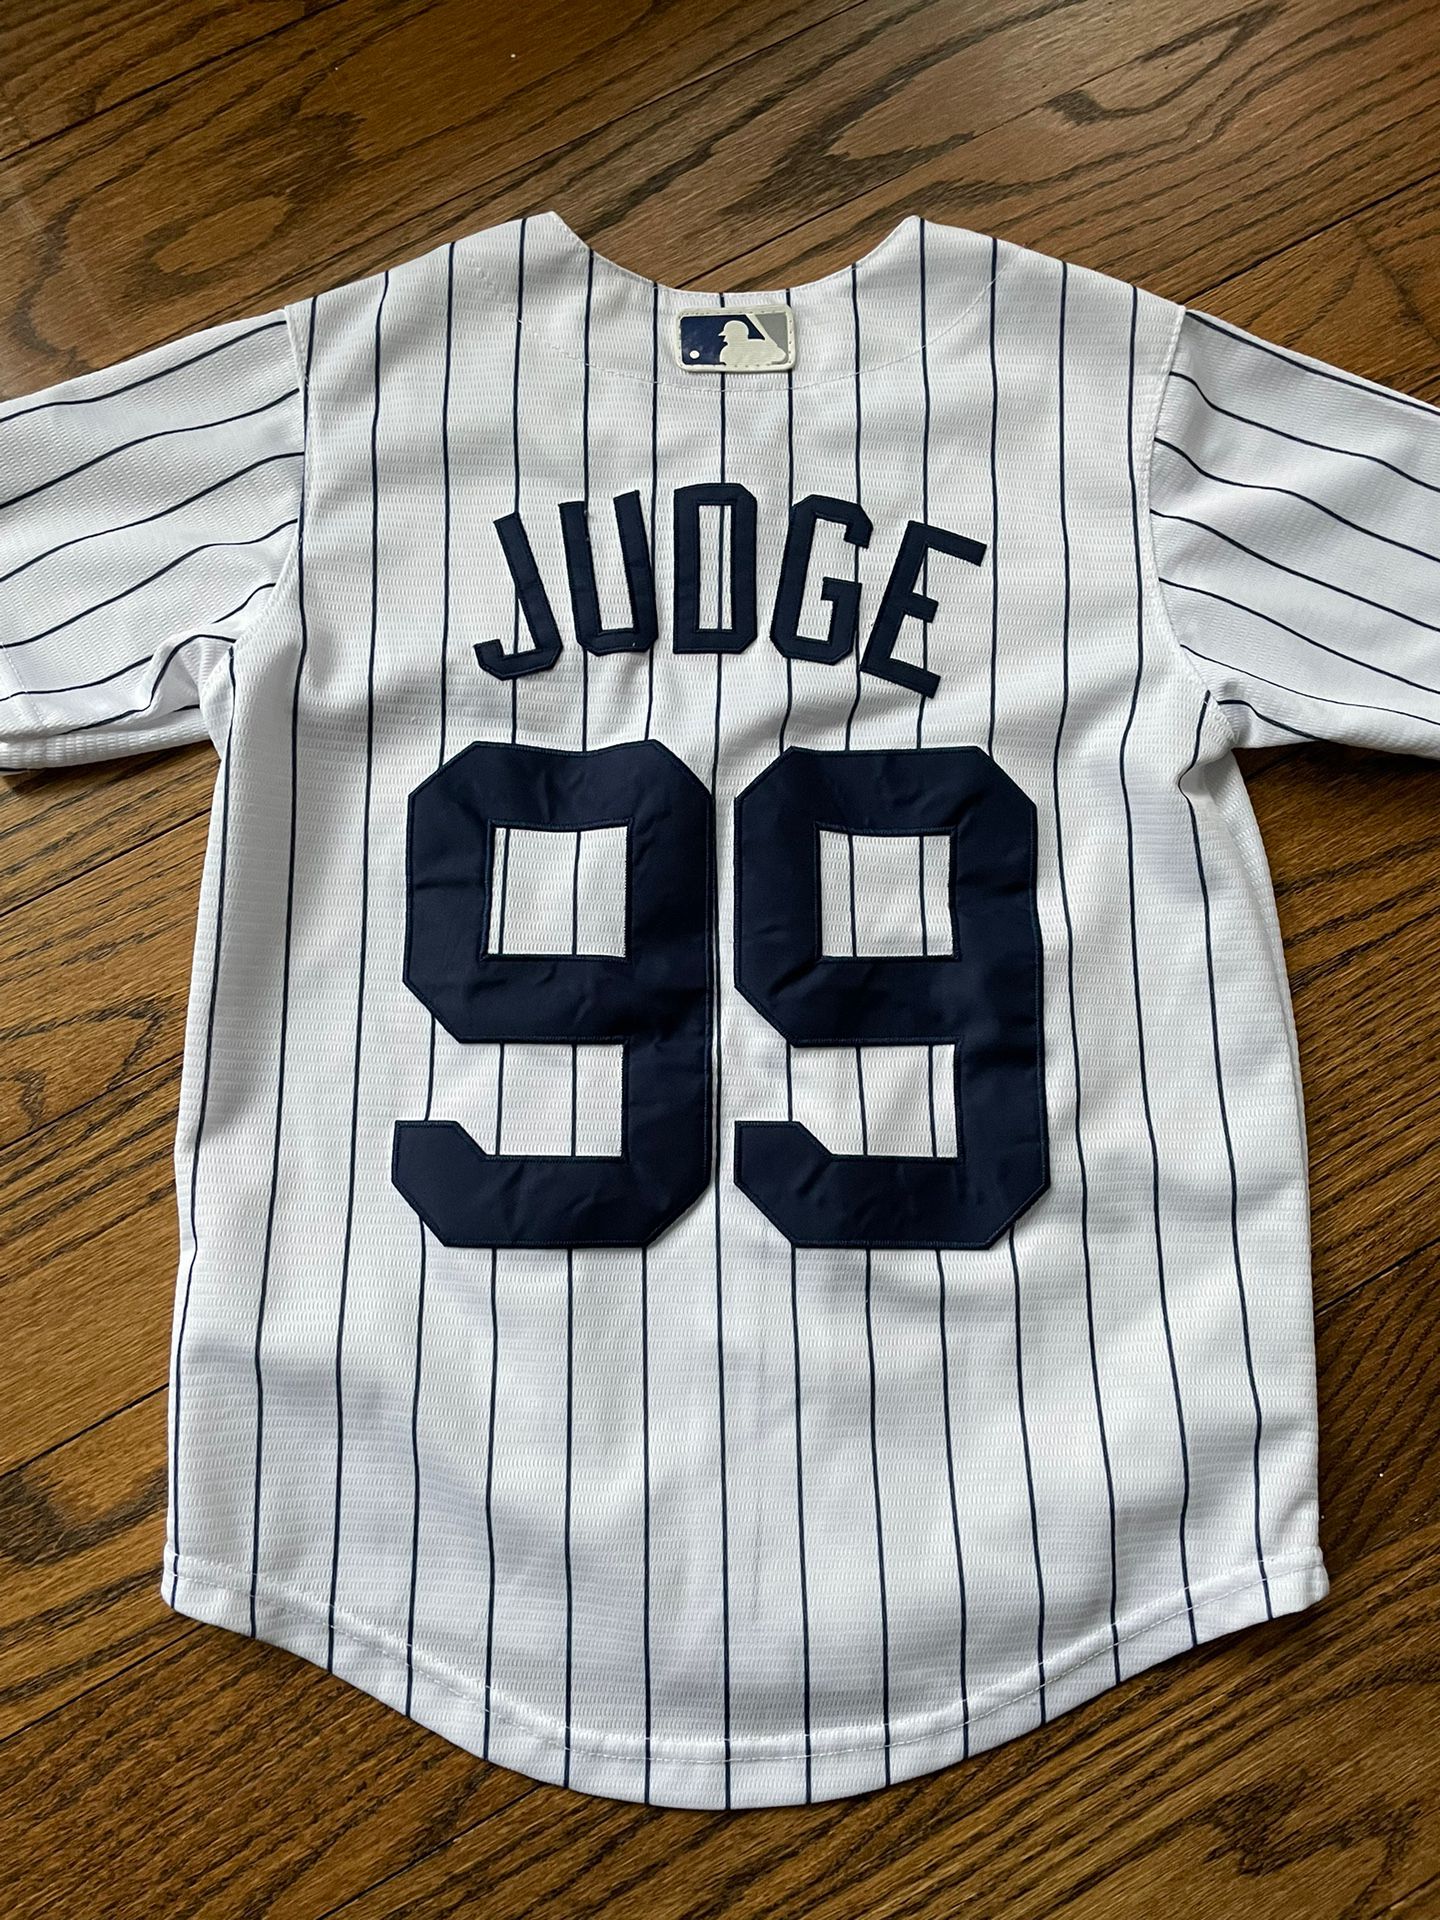 aaron judge youth jersey